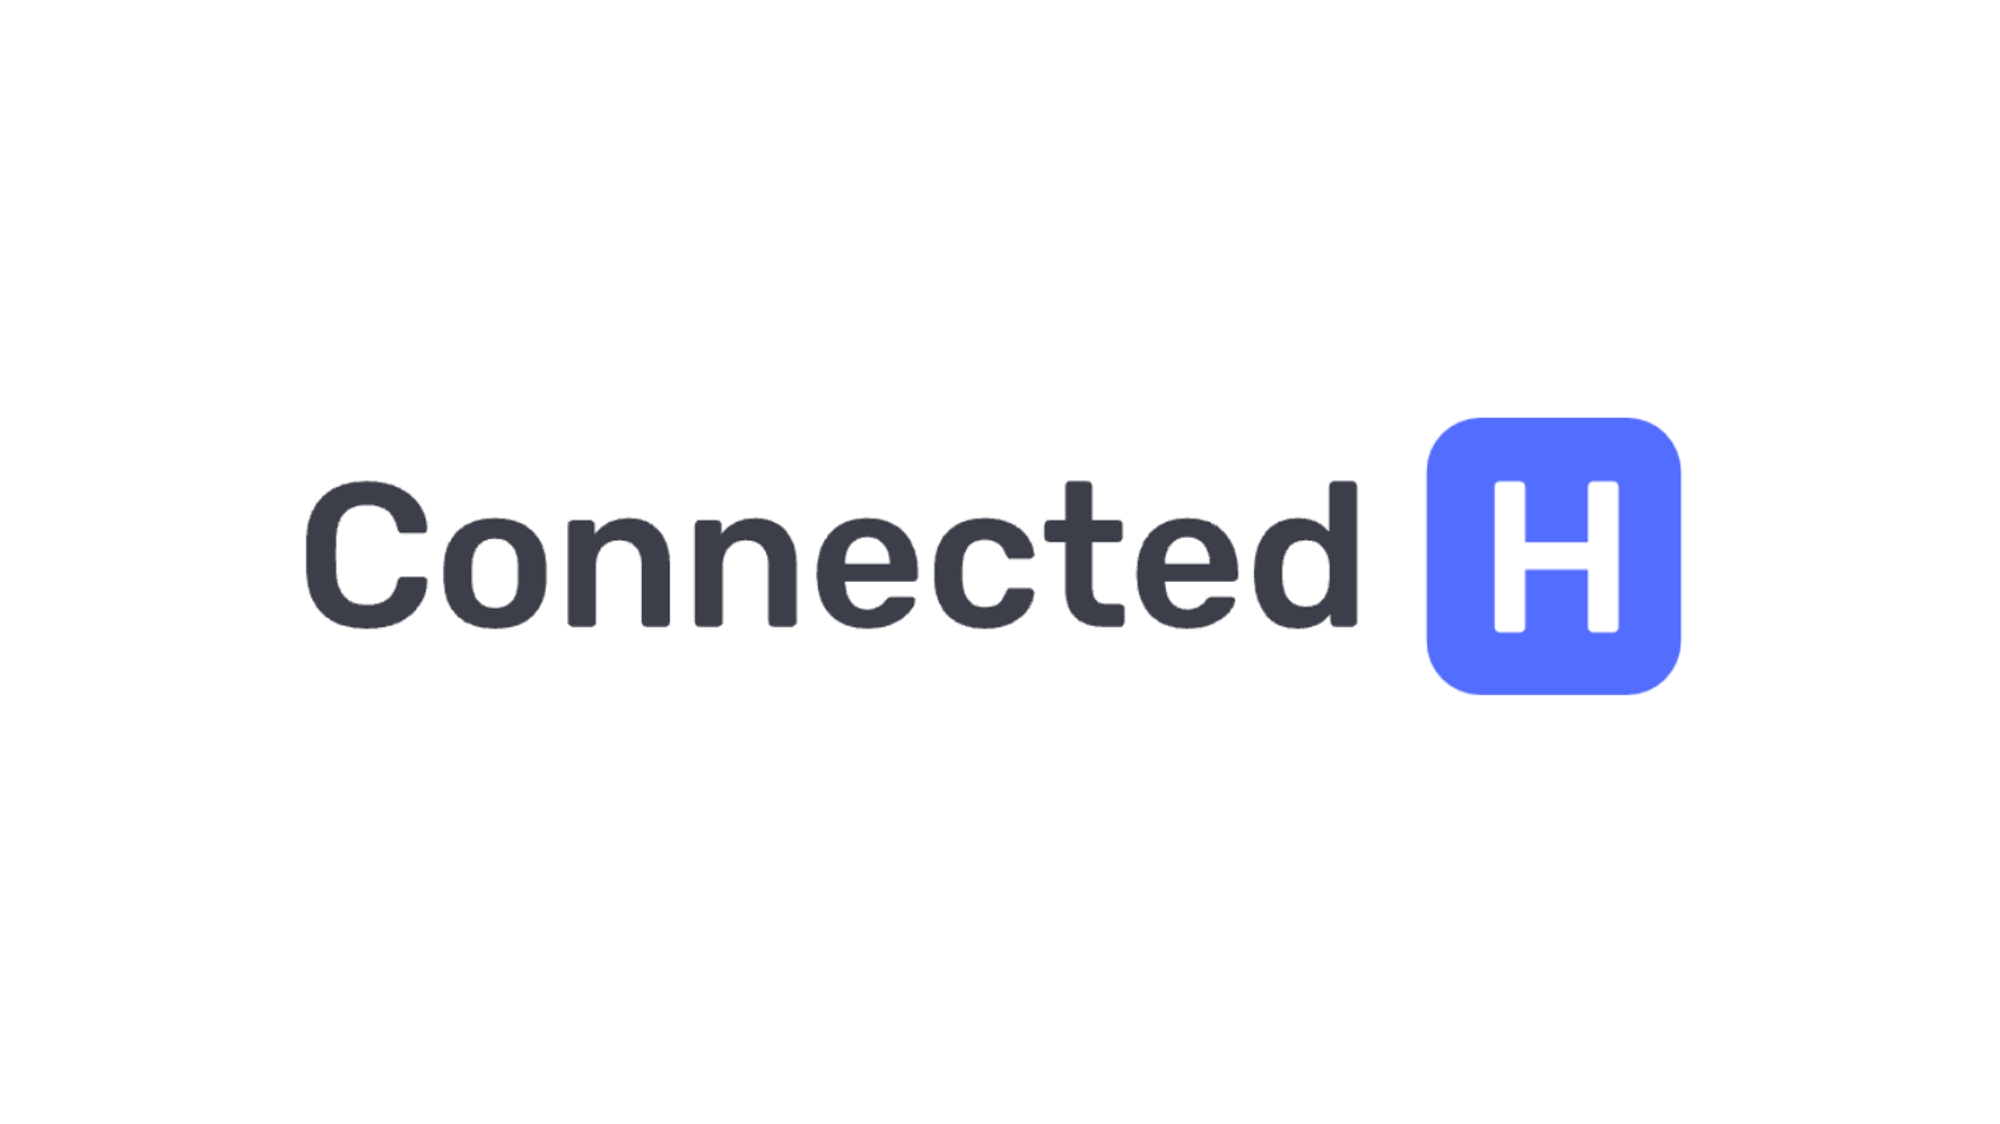 Connected H